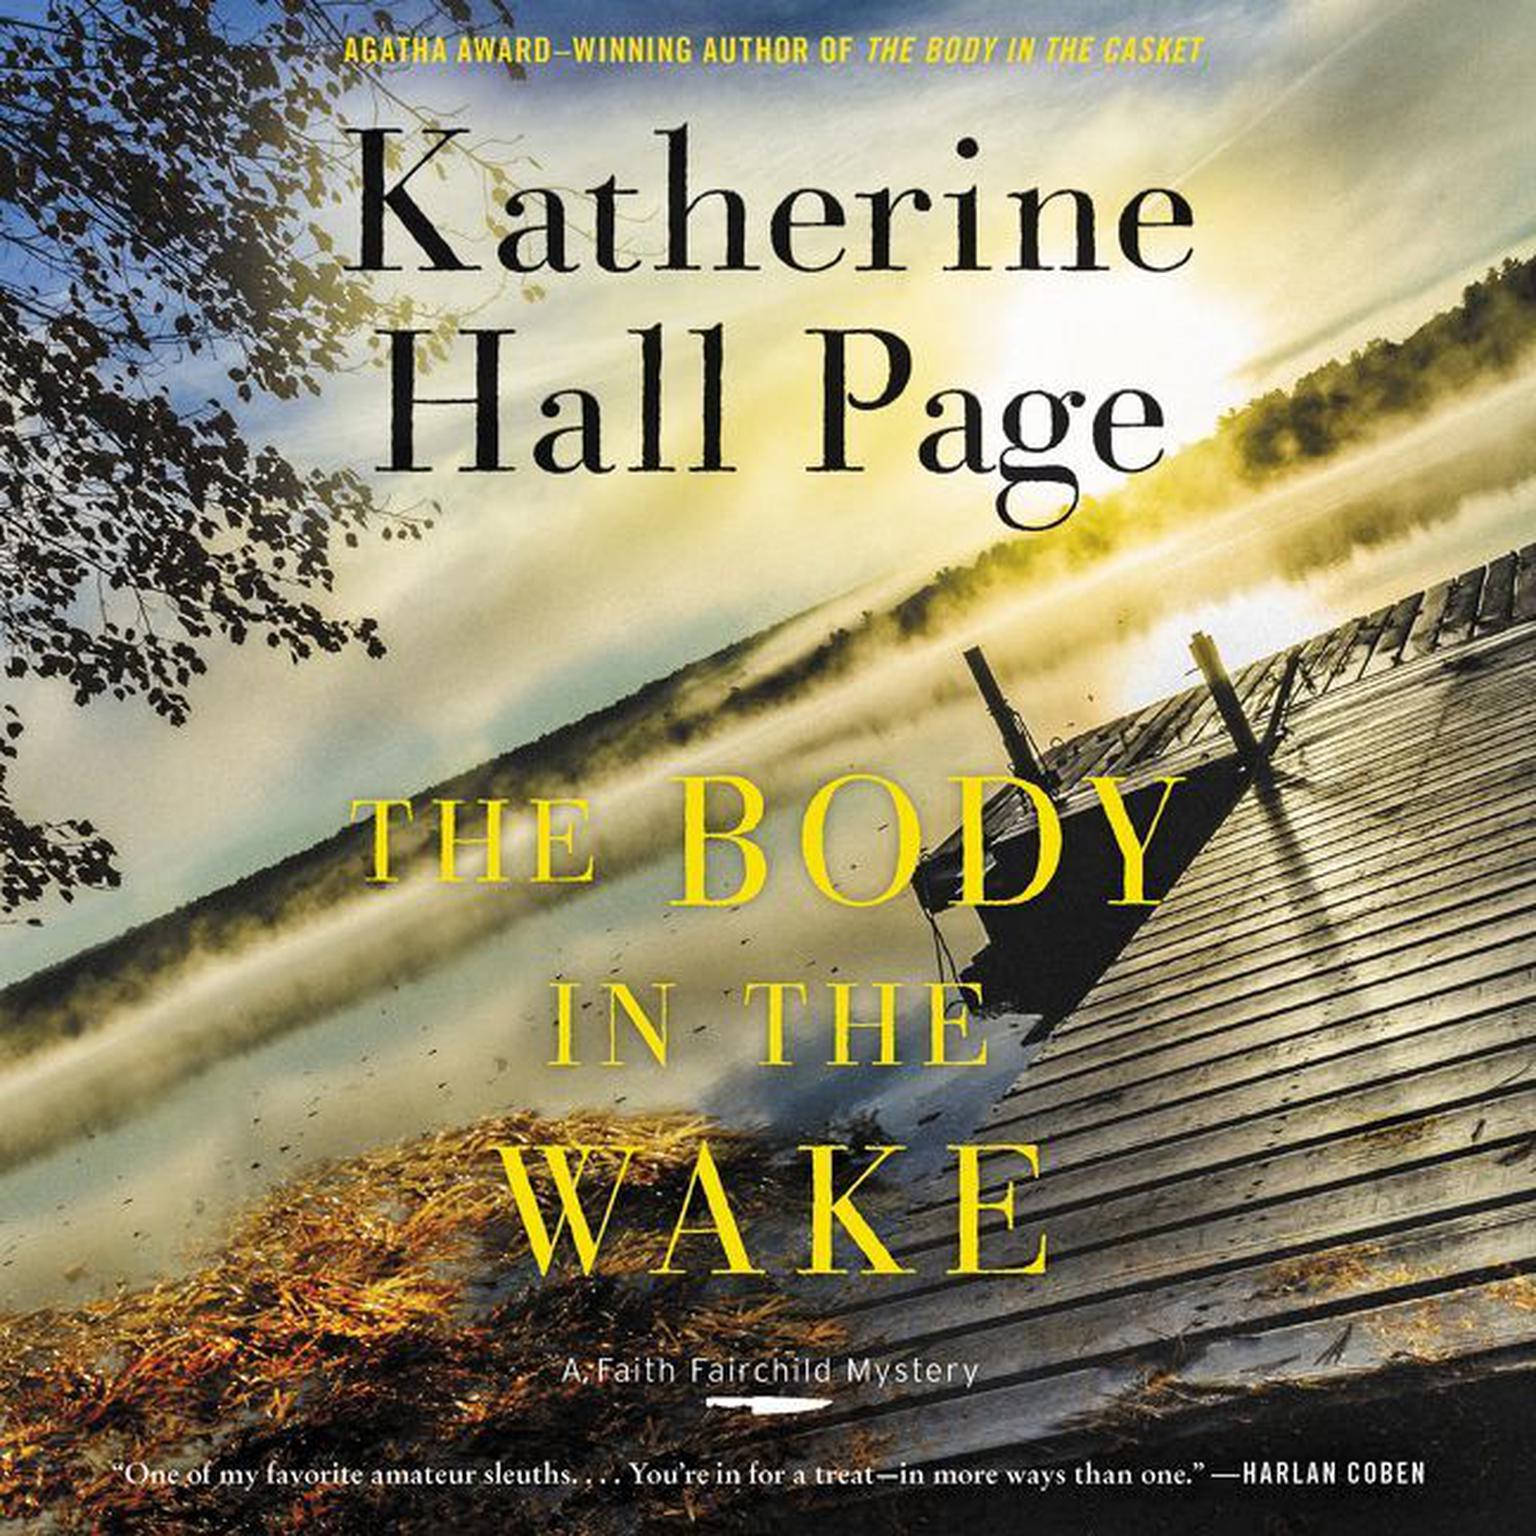 The Body in the Wake: A Faith Fairchild Mystery Audiobook, by Katherine Hall Page